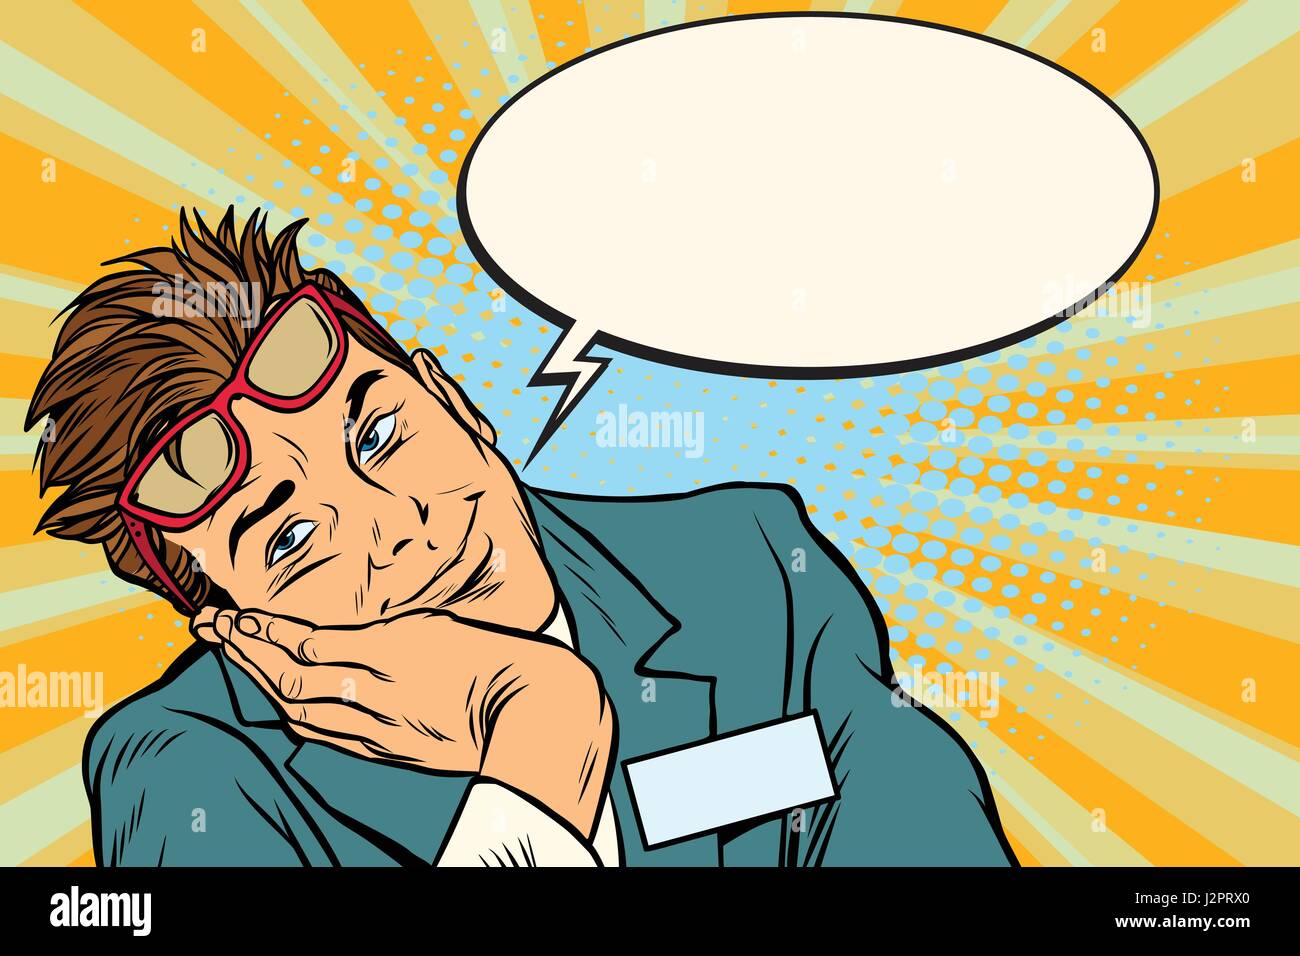 Dreaming businessman with glasses Stock Vector